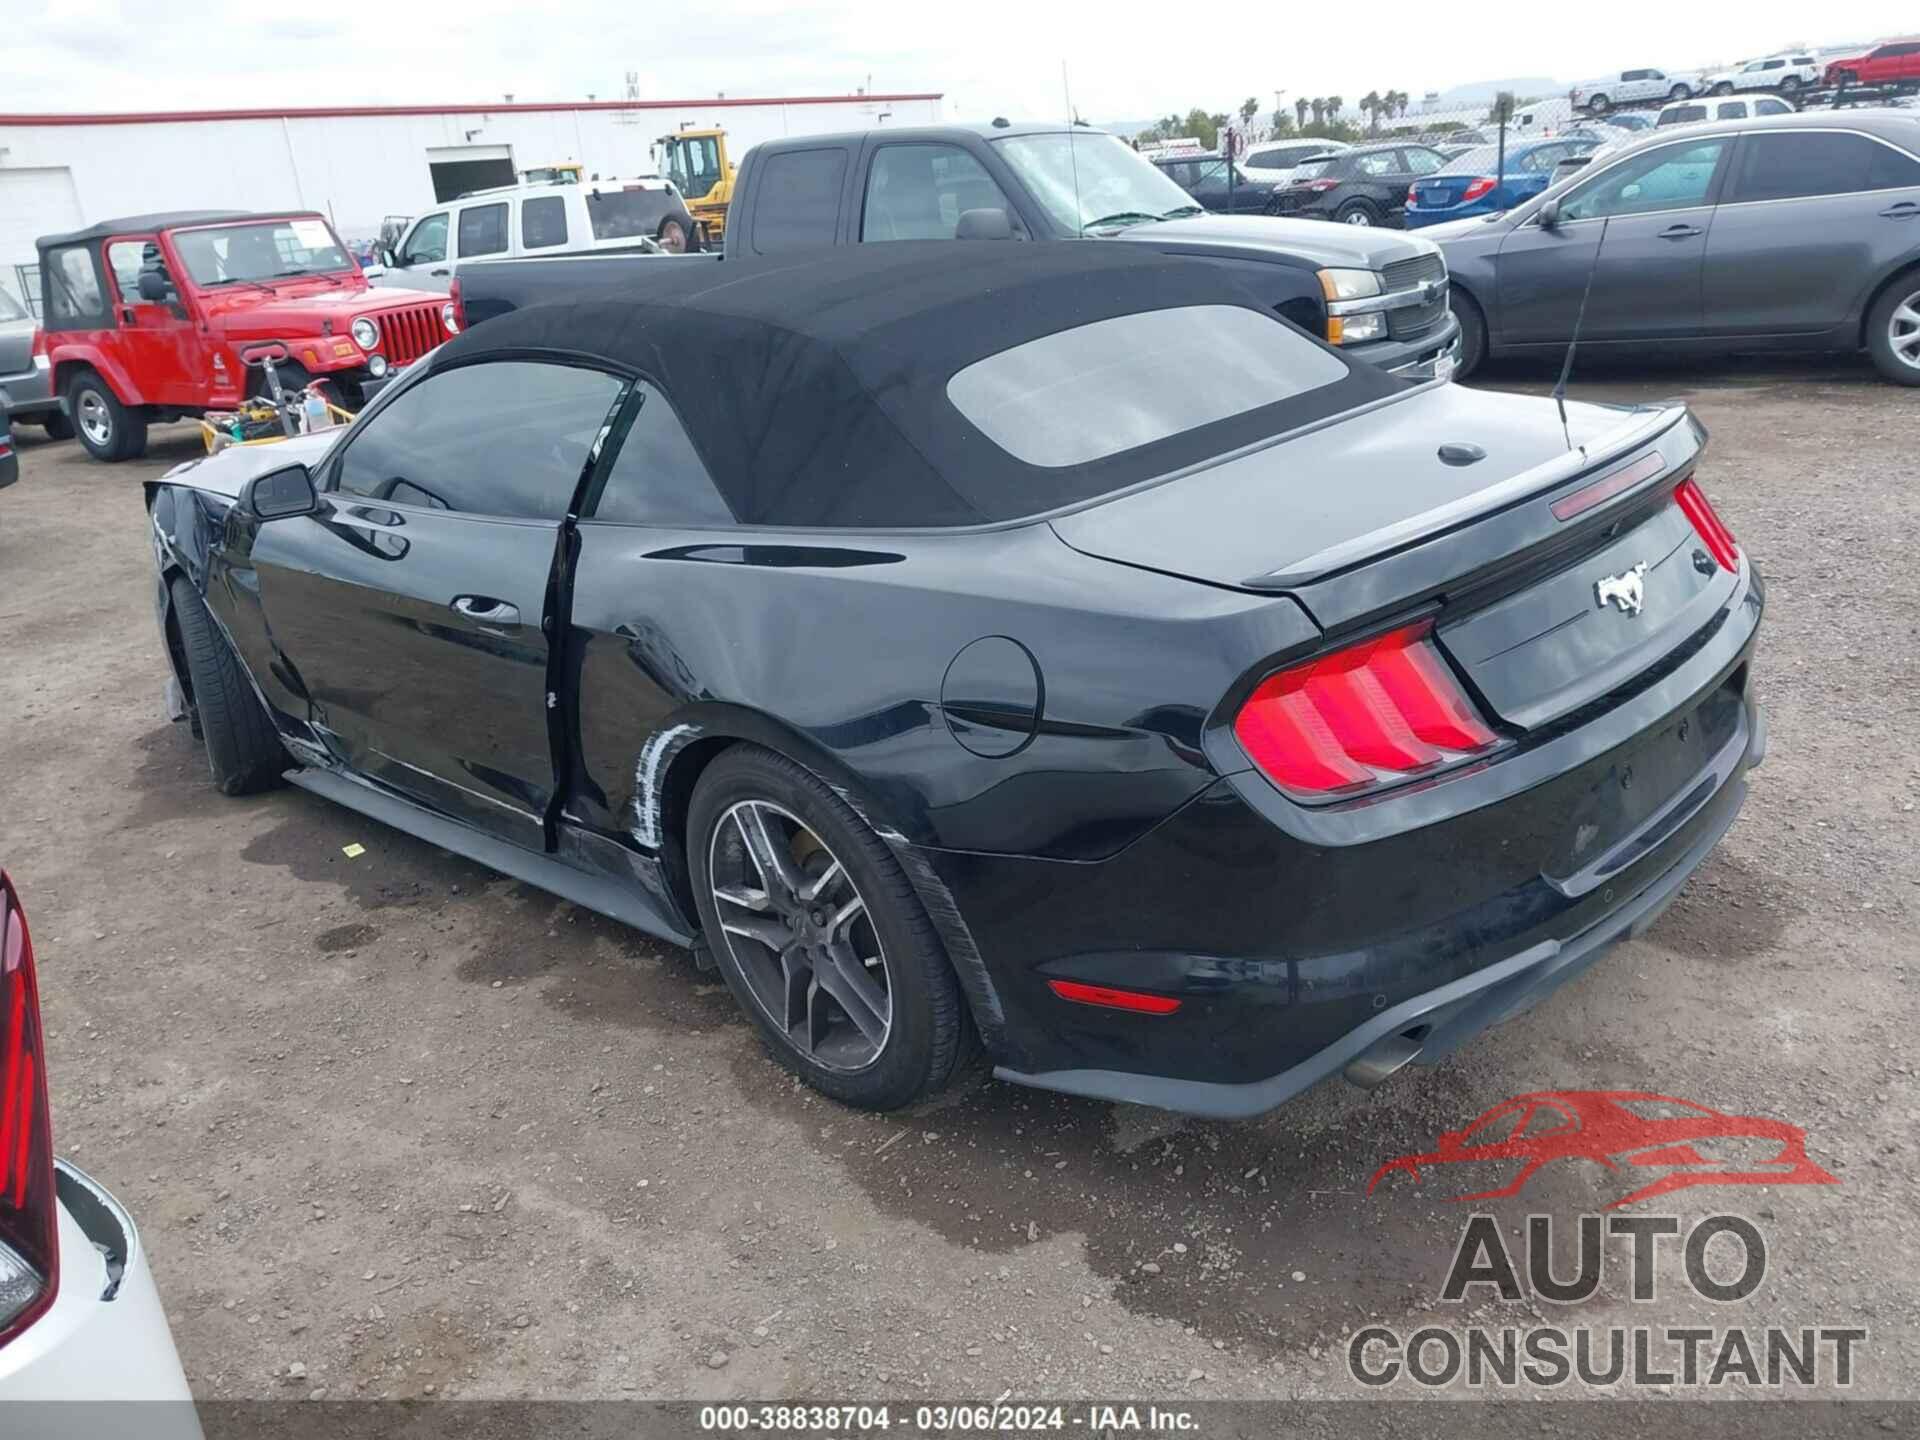 FORD MUSTANG 2019 - 1FATP8UH8K5150196